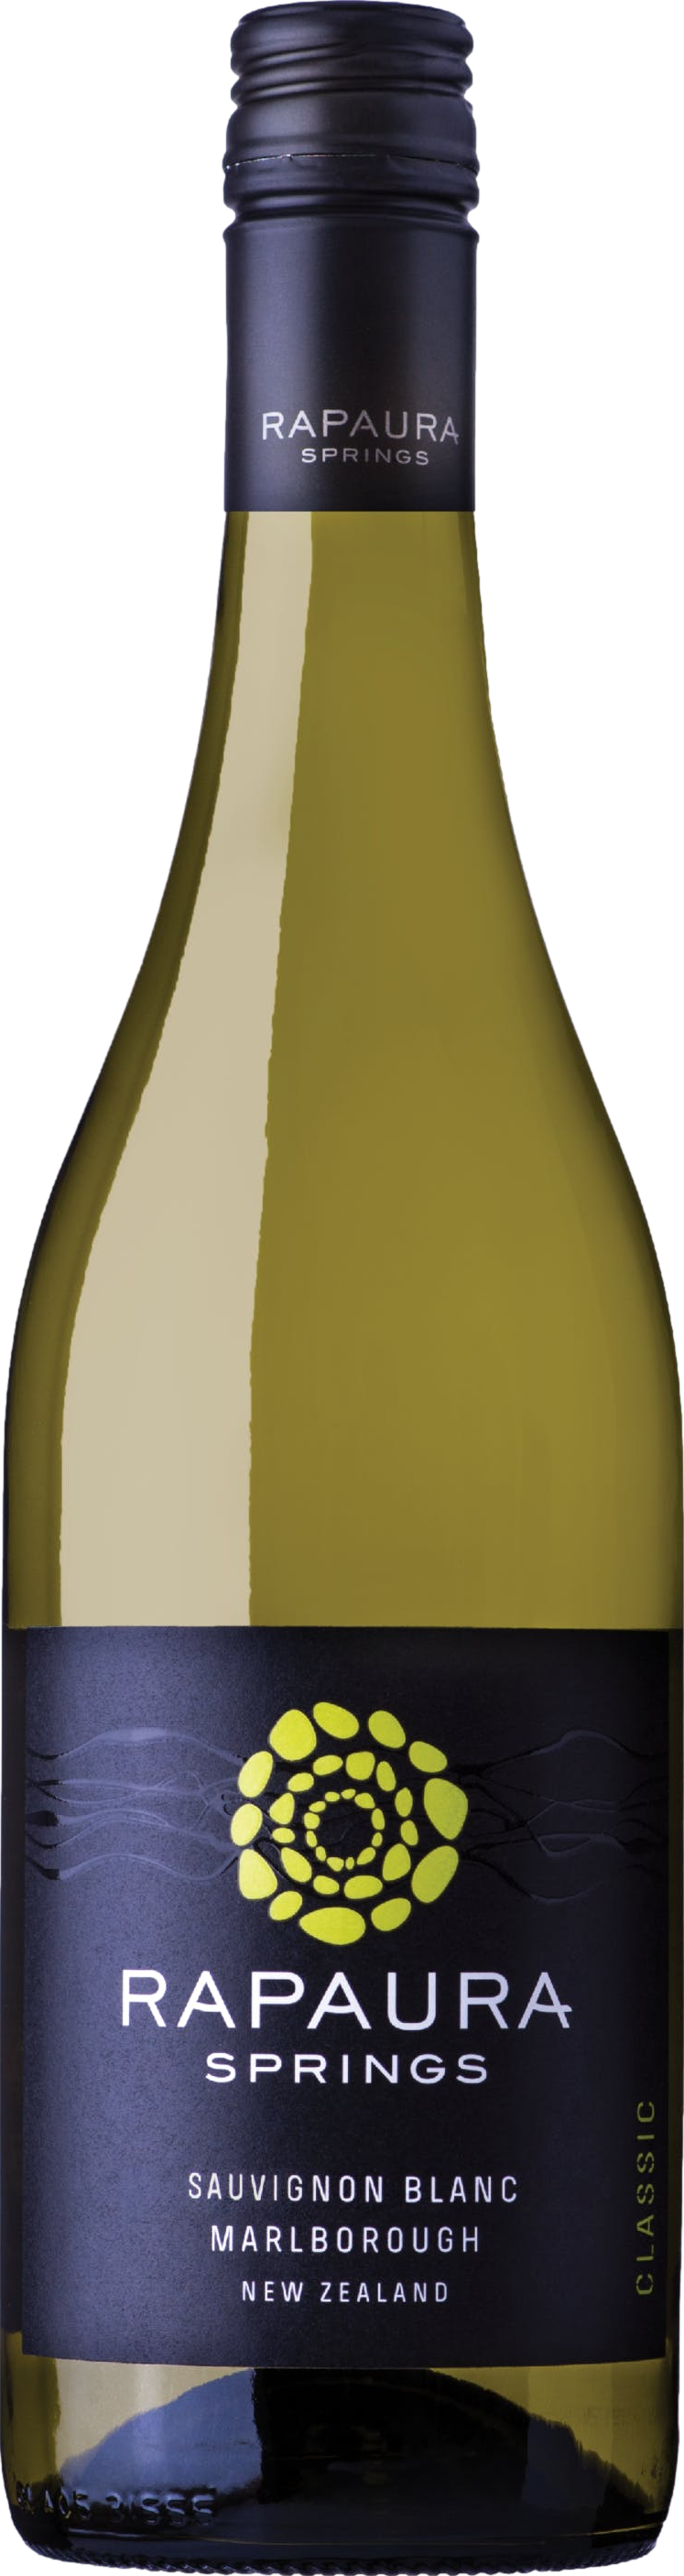 Product image of Rapaura Springs Sauvignon Blanc 2022 from 8wines